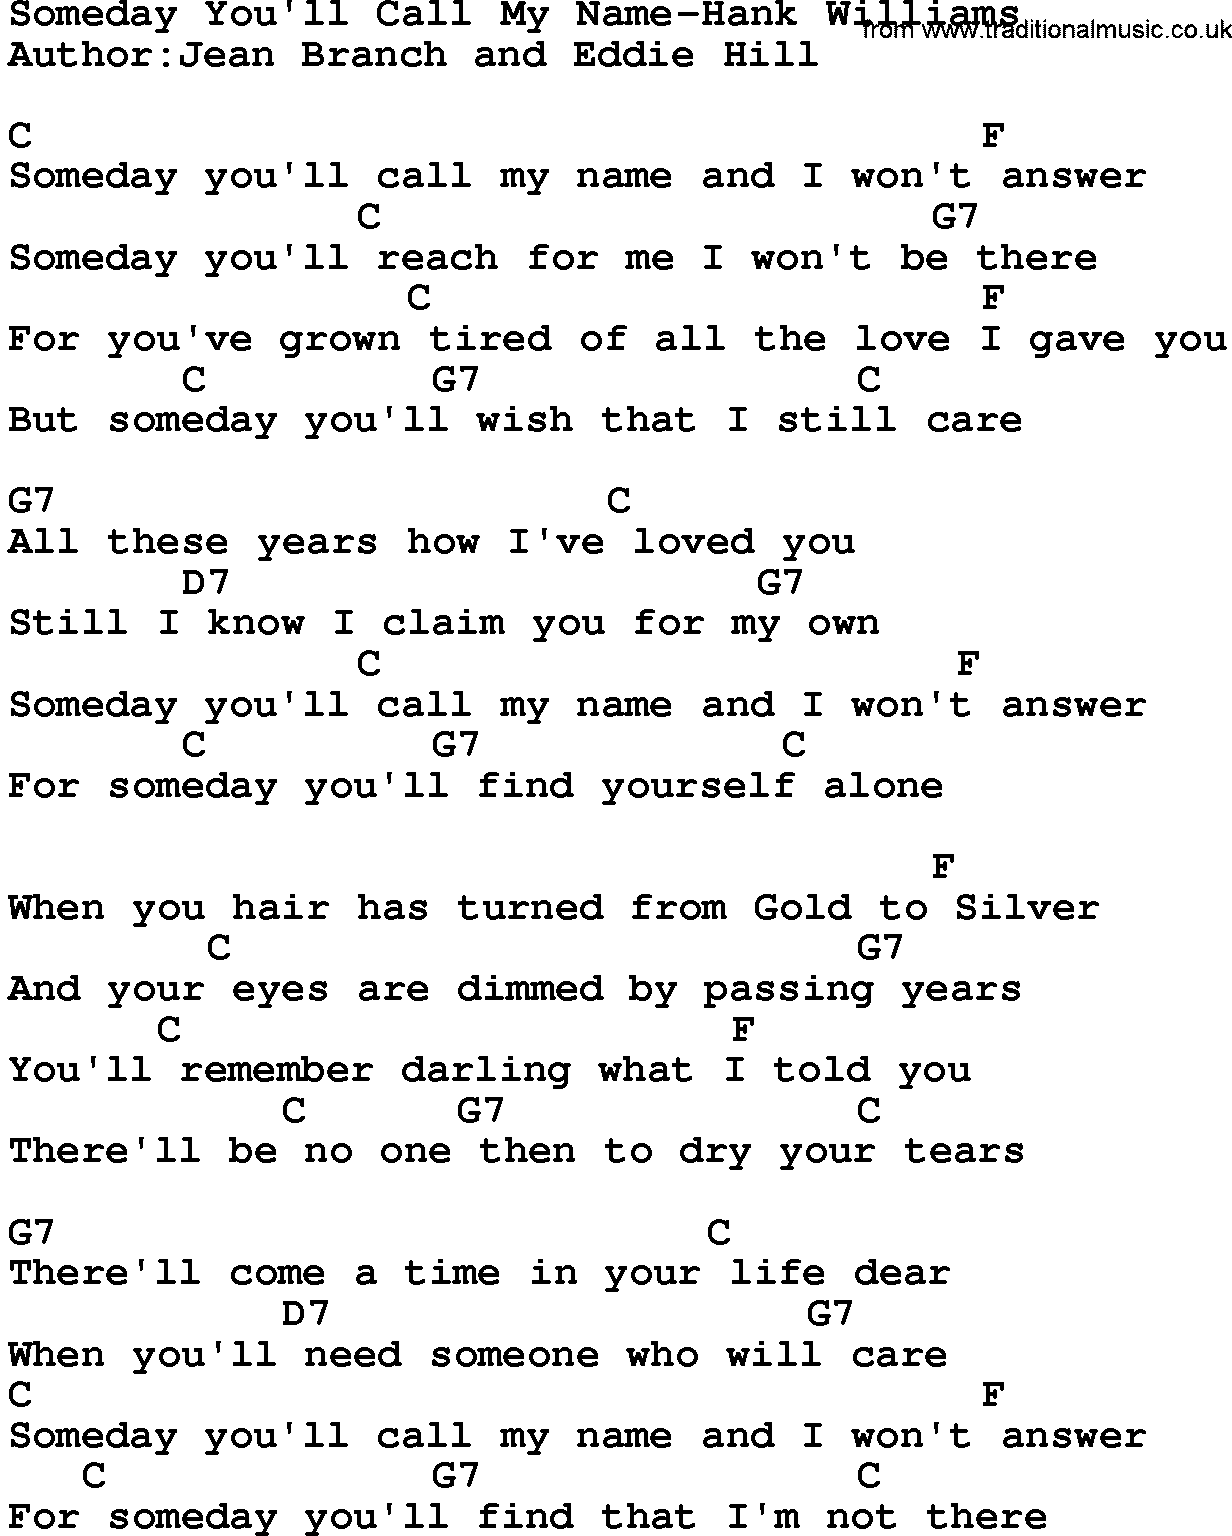 Country music song: Someday You'll Call My Name-Hank Williams lyrics and chords